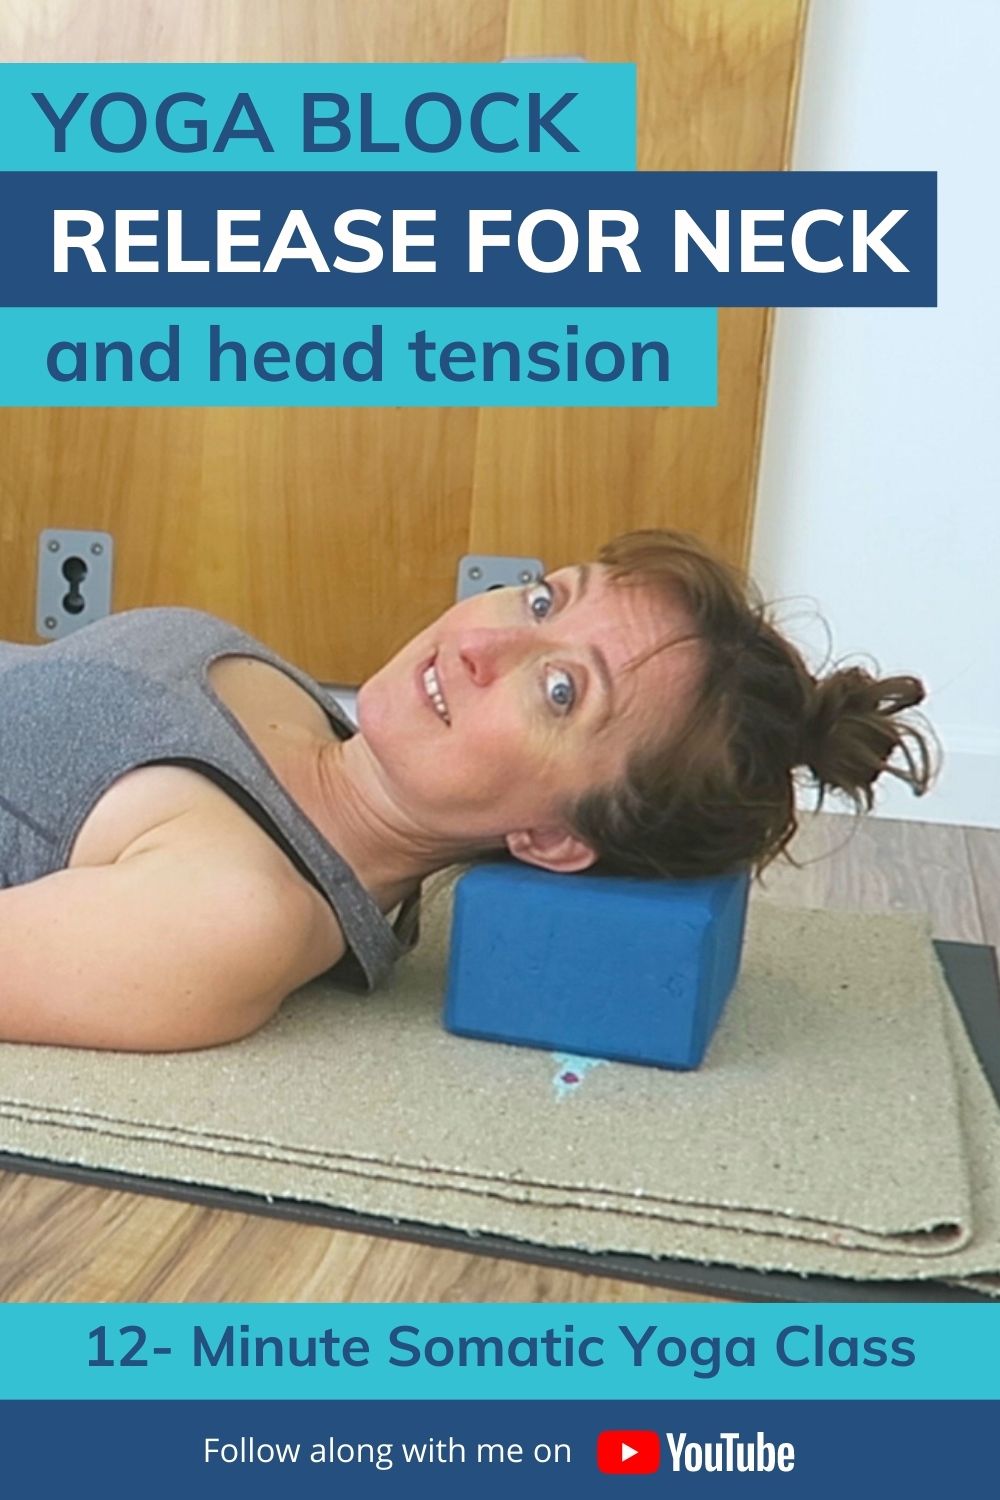 yoga block release for neck and head tension 12-minute somatic yoga class